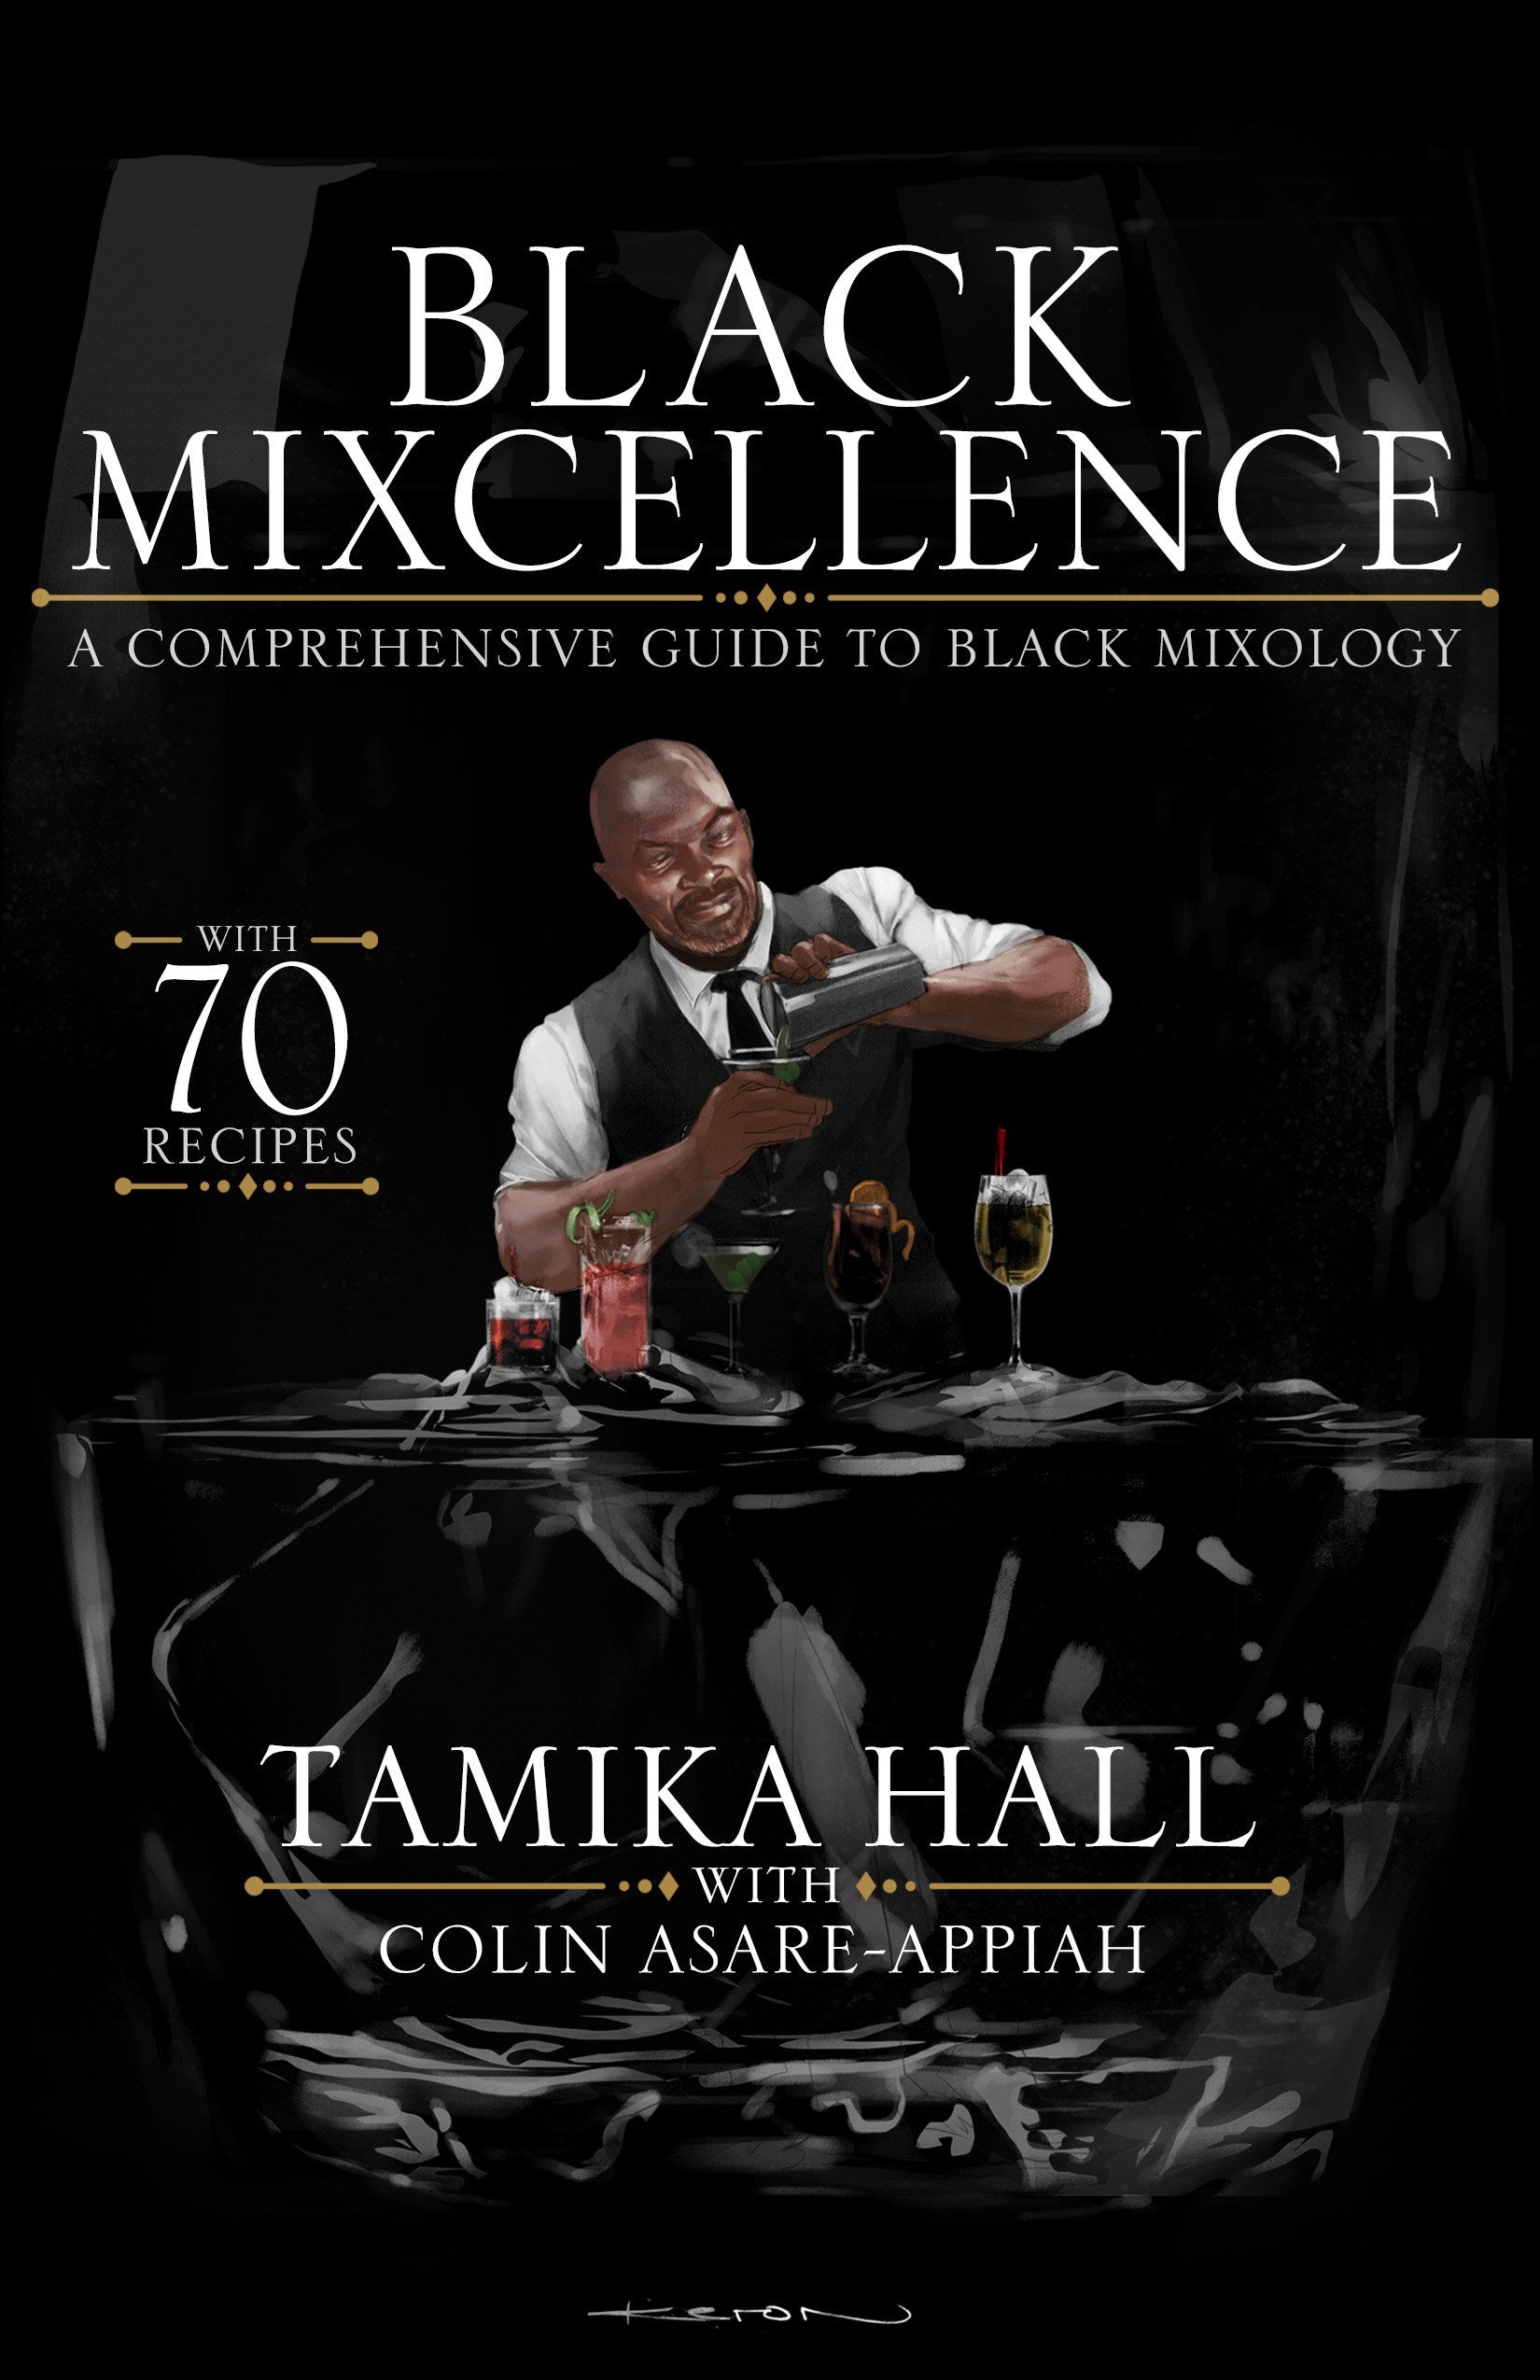 Black Mixcellence: A Comprehensive Guide to Black Mixology (A Cocktail Recipe Book, Classic Cocktails, and Mixed Drinks)